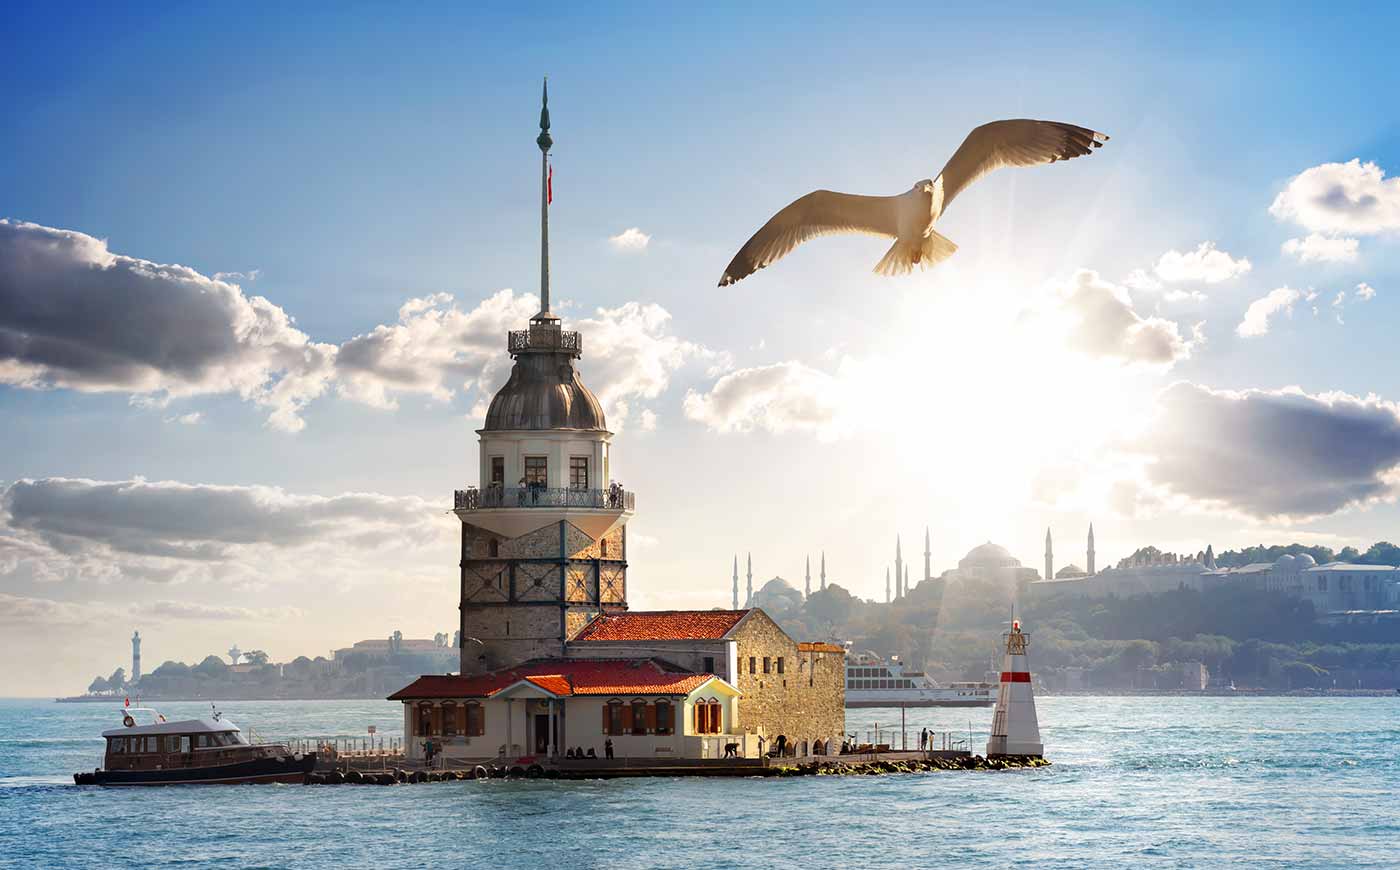 Maiden Tower and Seagul in Turkey